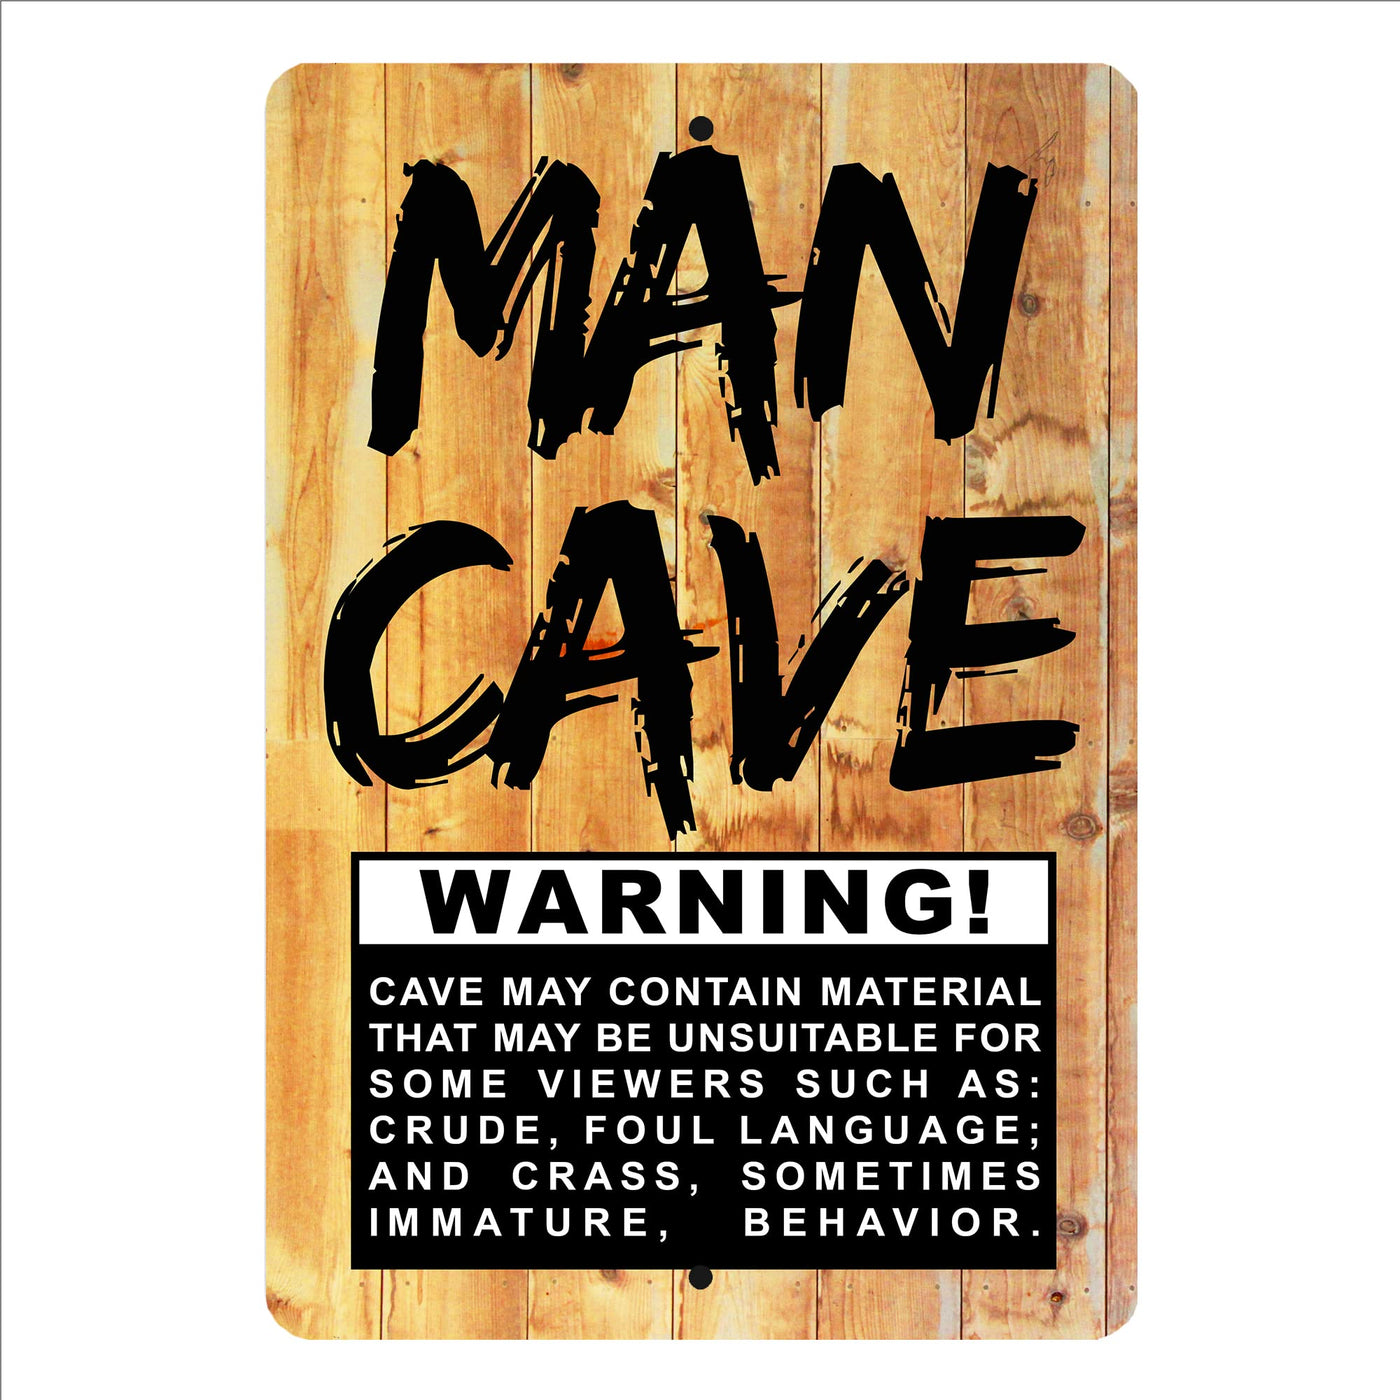 Man Cave -May Contain Unsuitable Material Metal Signs Vintage Wall Art -8 x 12" Funny Rustic Tin Sign for Home, Bar, Garage, Shop, Military Decor - Tin Sign Decor for Men Accessories & Gifts!